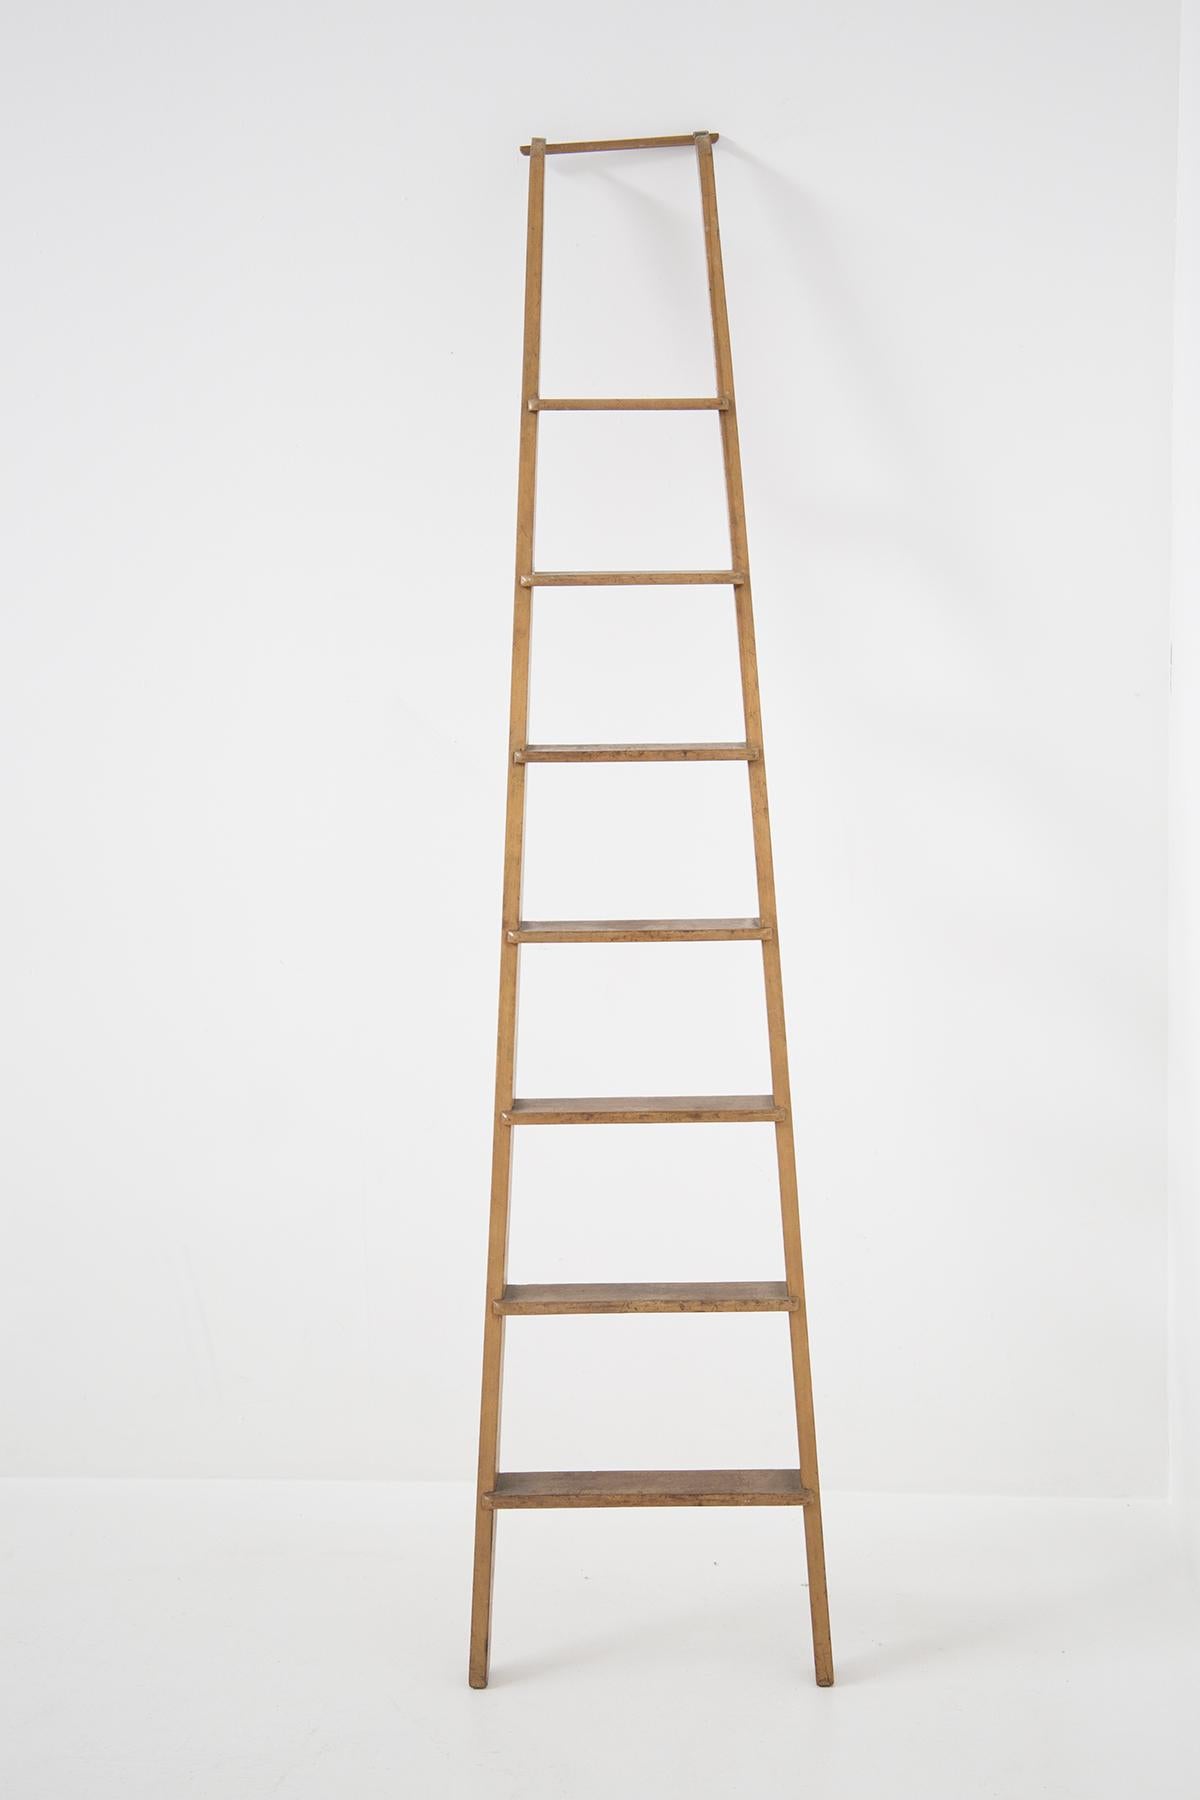 Mid-20th Century Vintage Italian Wooden Ladder For Sale